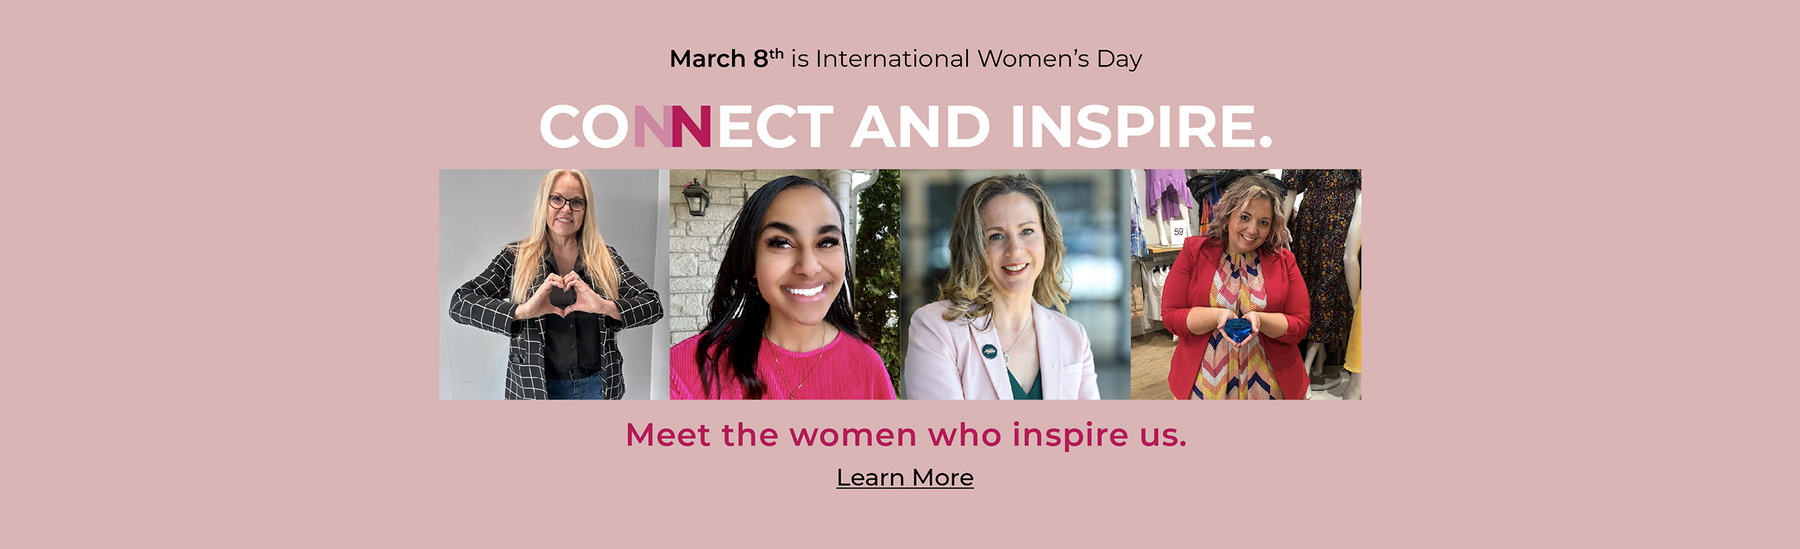 March 8 is international women's day. Connect and inspire. Meet the women who inspire us.